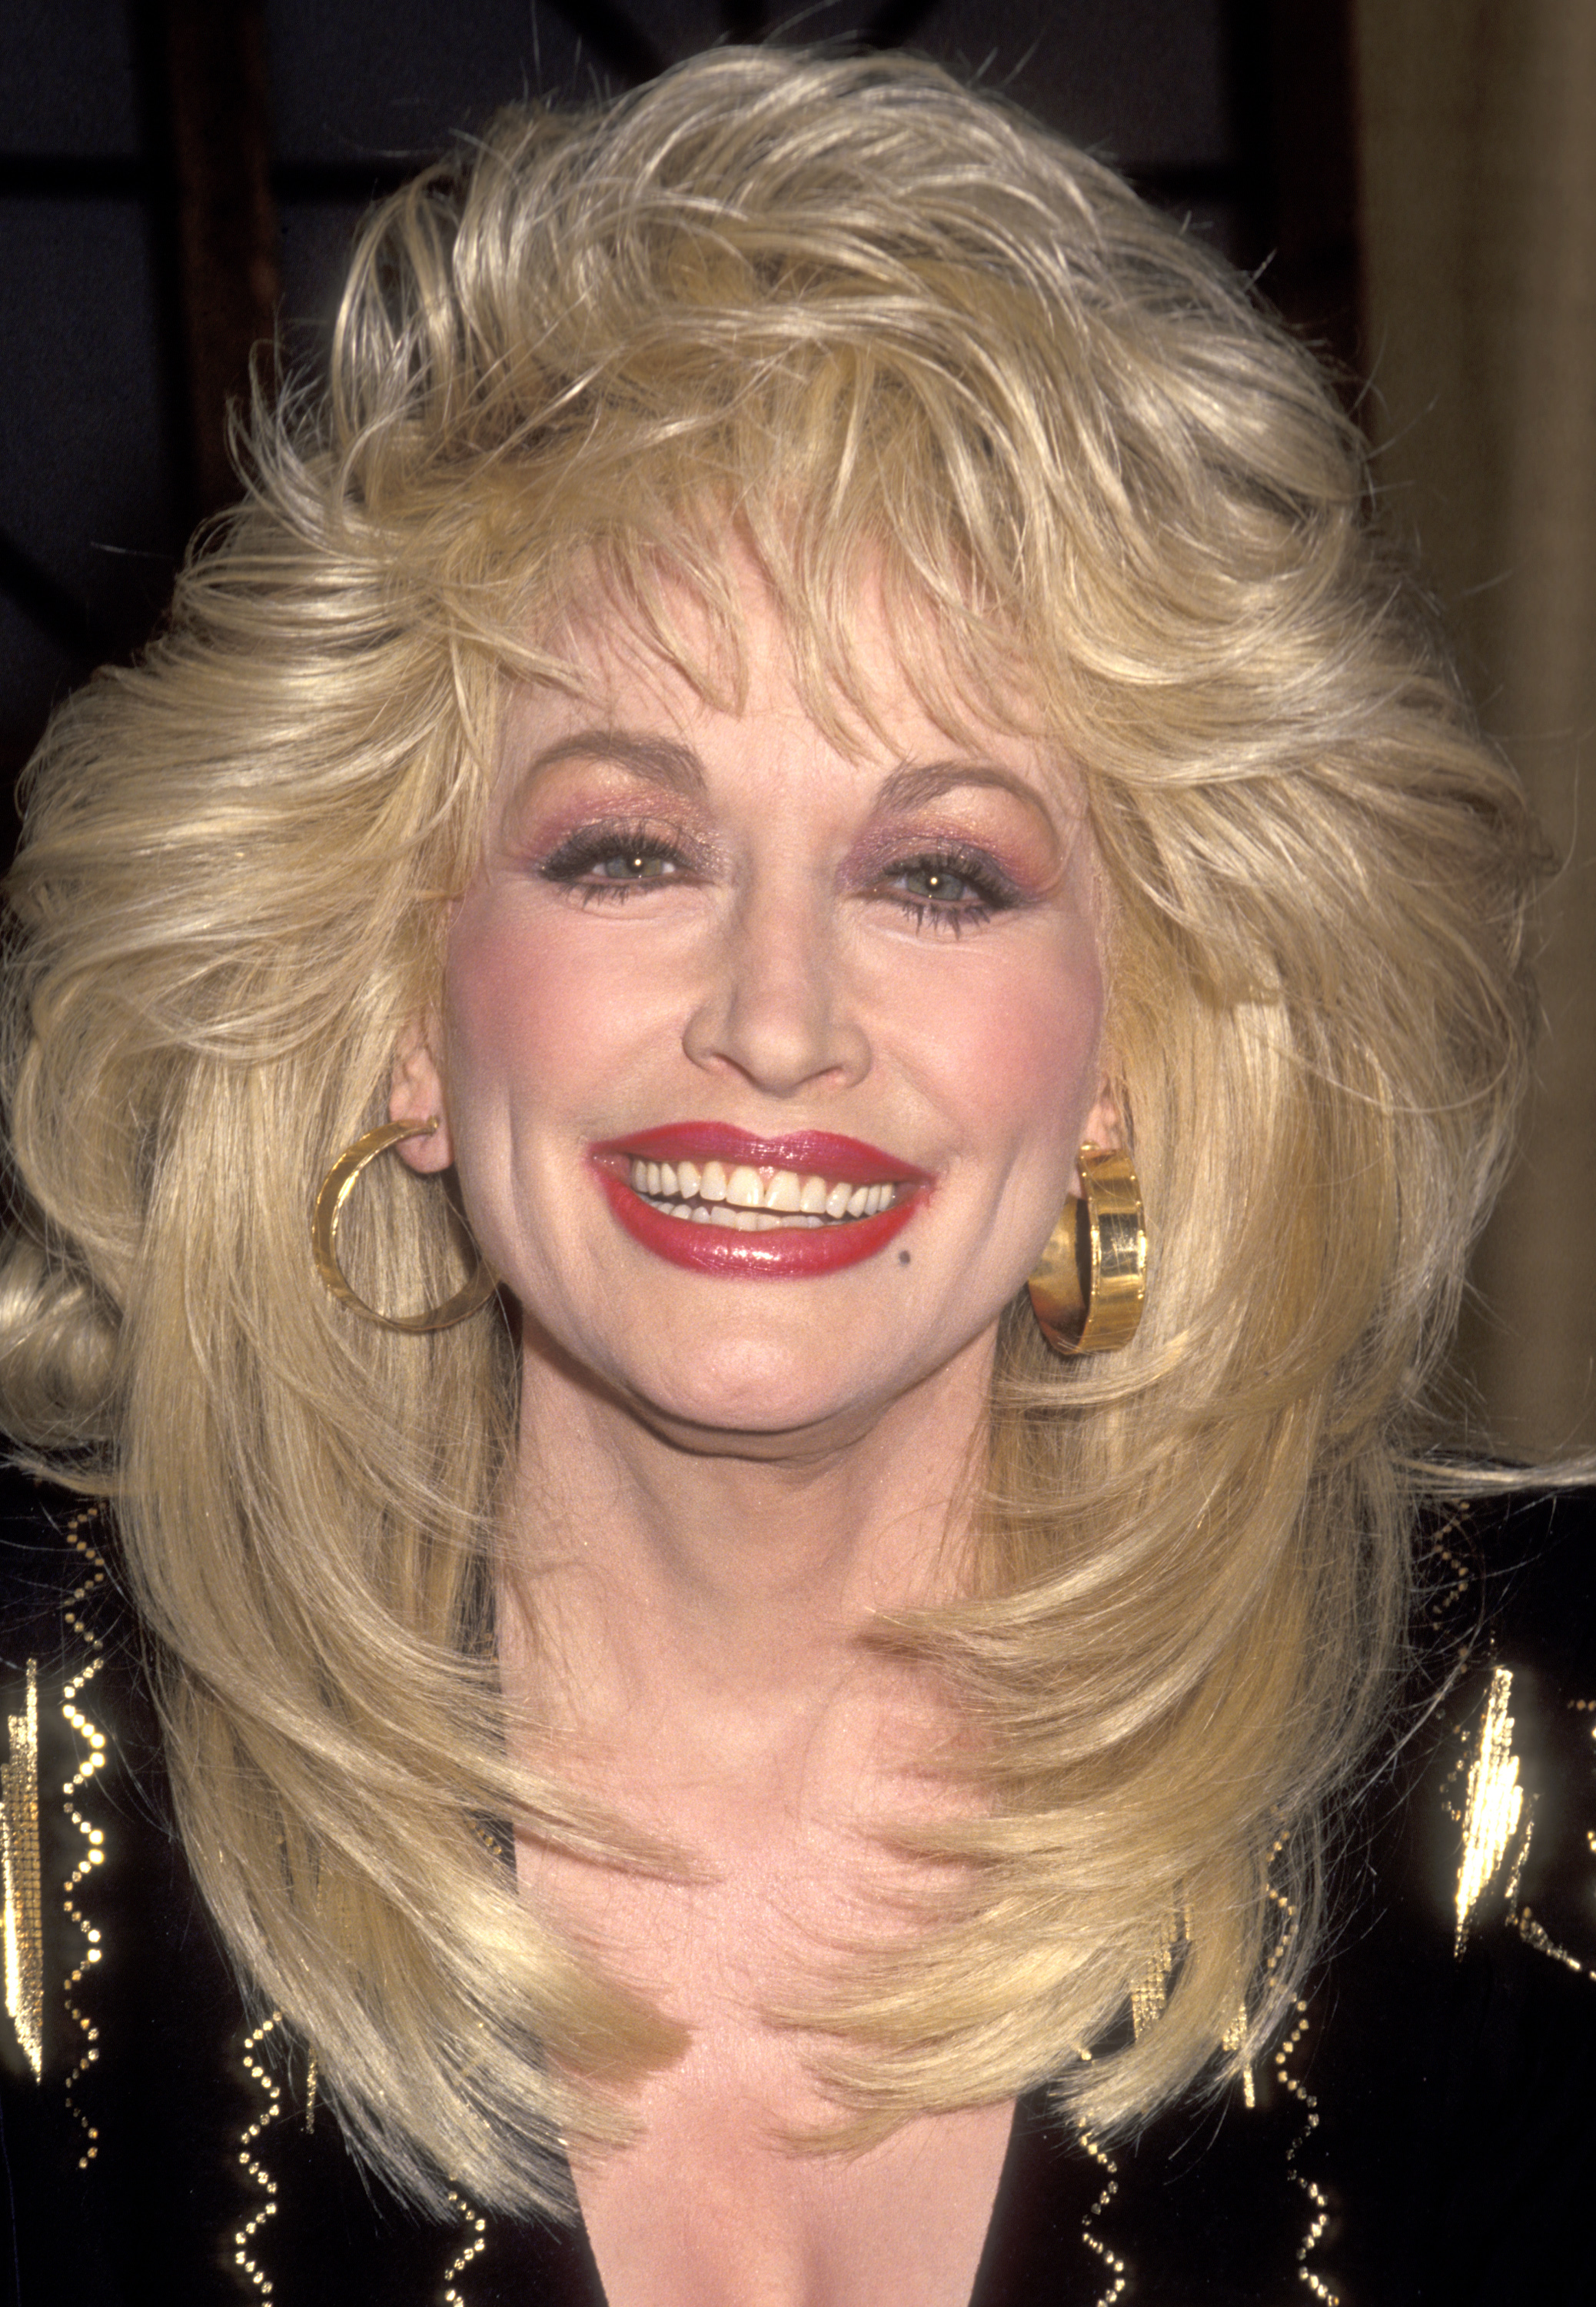 Dolly Parton attends a Taping of "The Joan Rivers Show" at CBS Broadcast Center in New York City on March 1, 1993. | Source: Getty Images